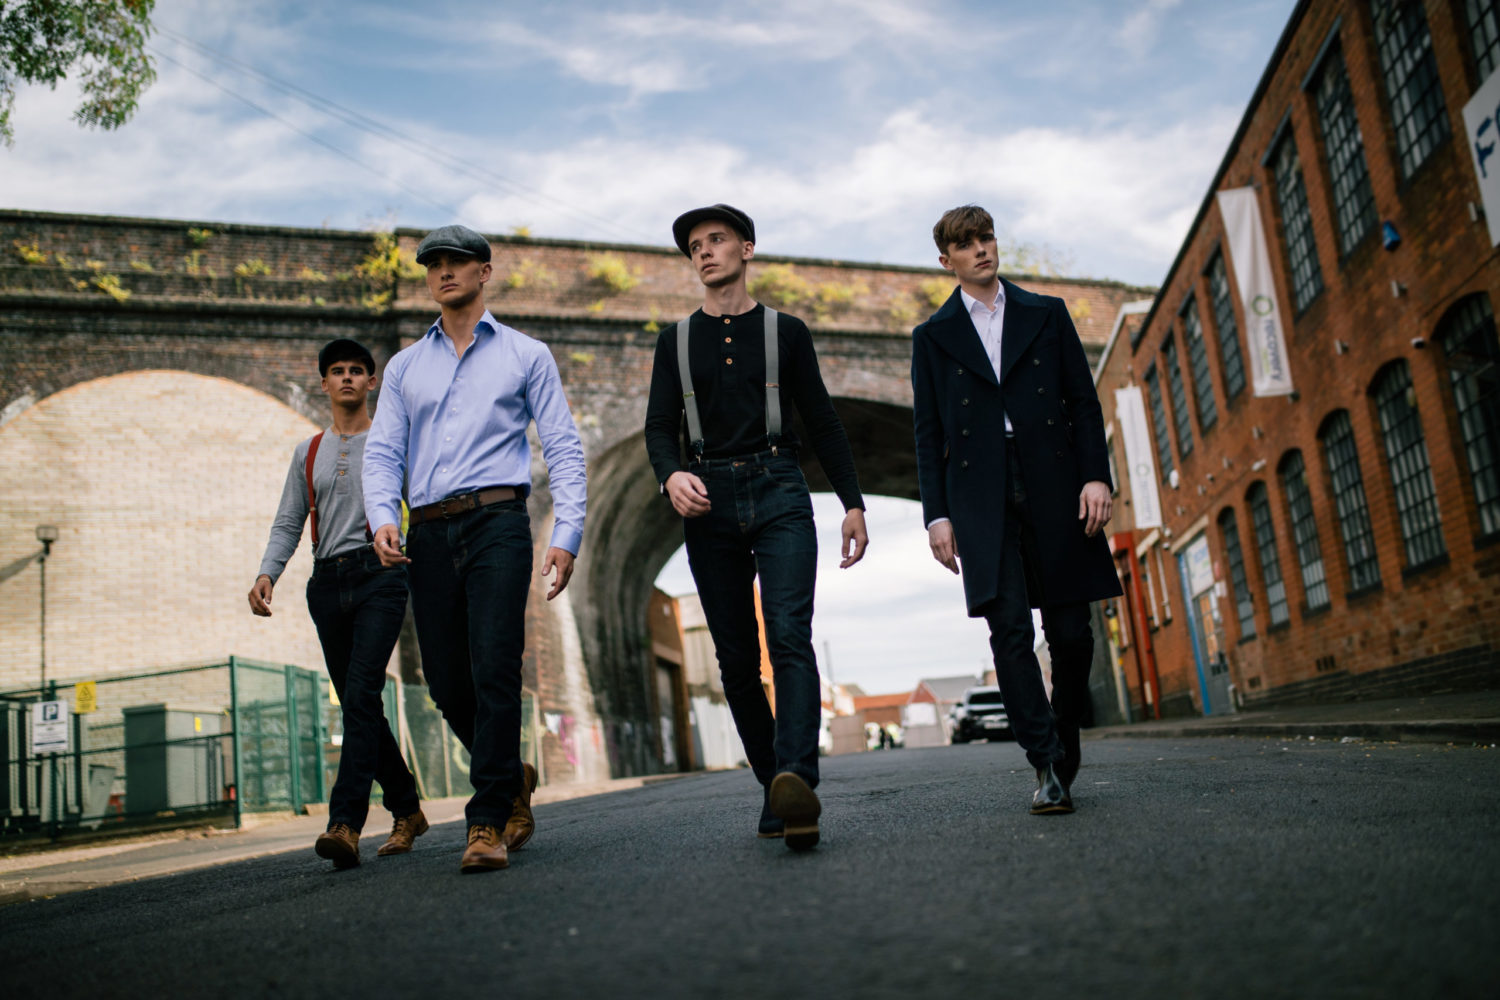 Get To Know The Peaky Blinders Suit Style – Leonard Silver